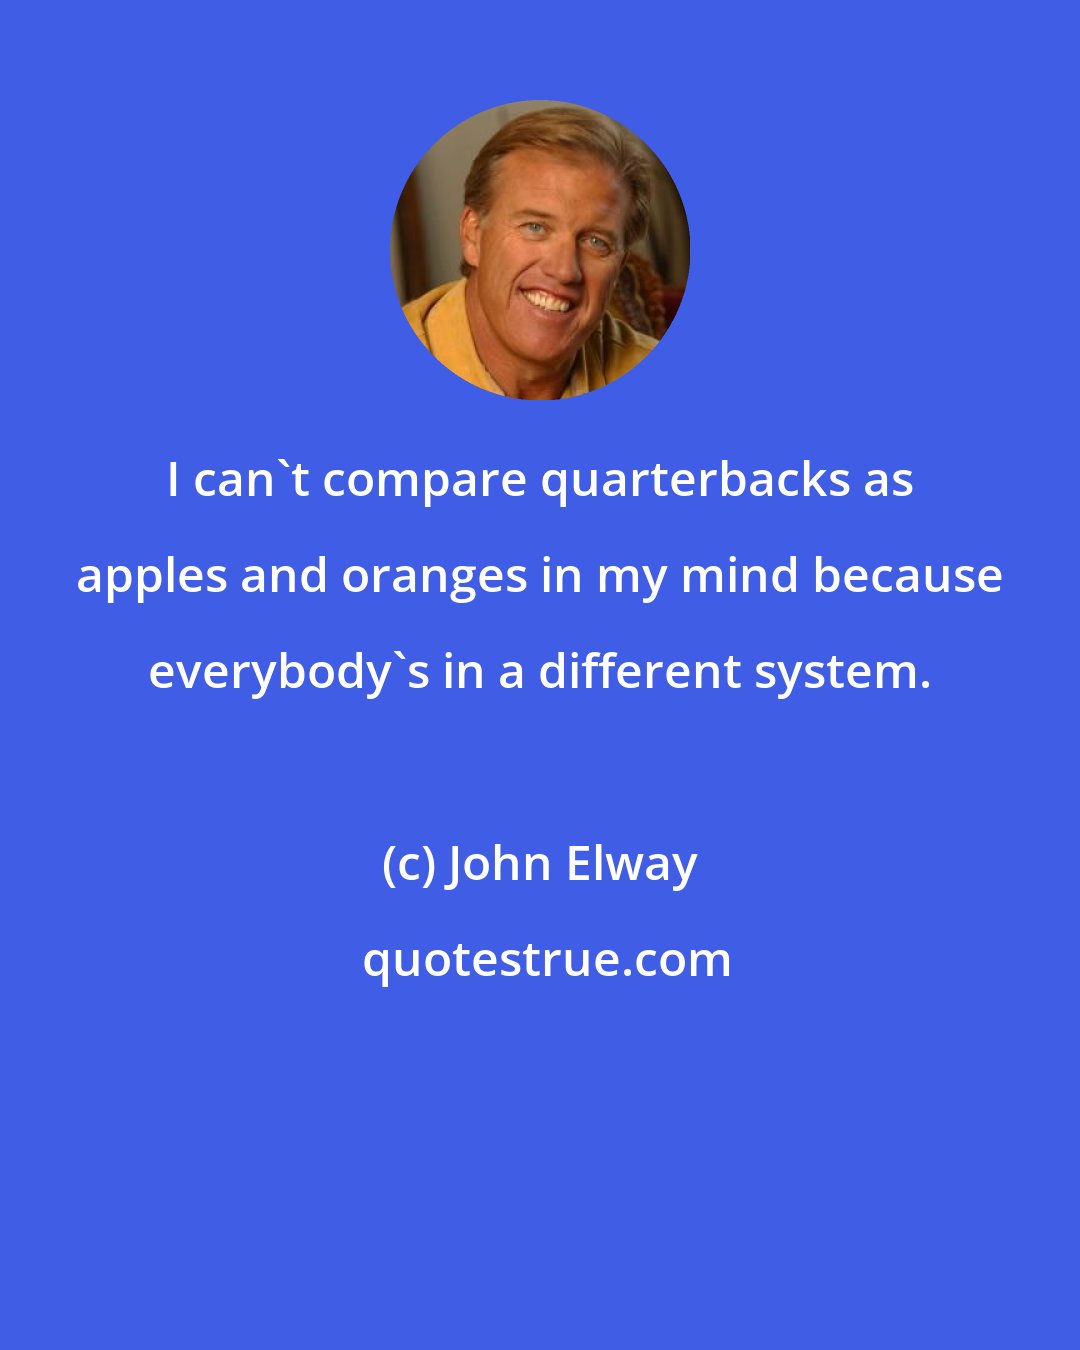 John Elway: I can't compare quarterbacks as apples and oranges in my mind because everybody's in a different system.